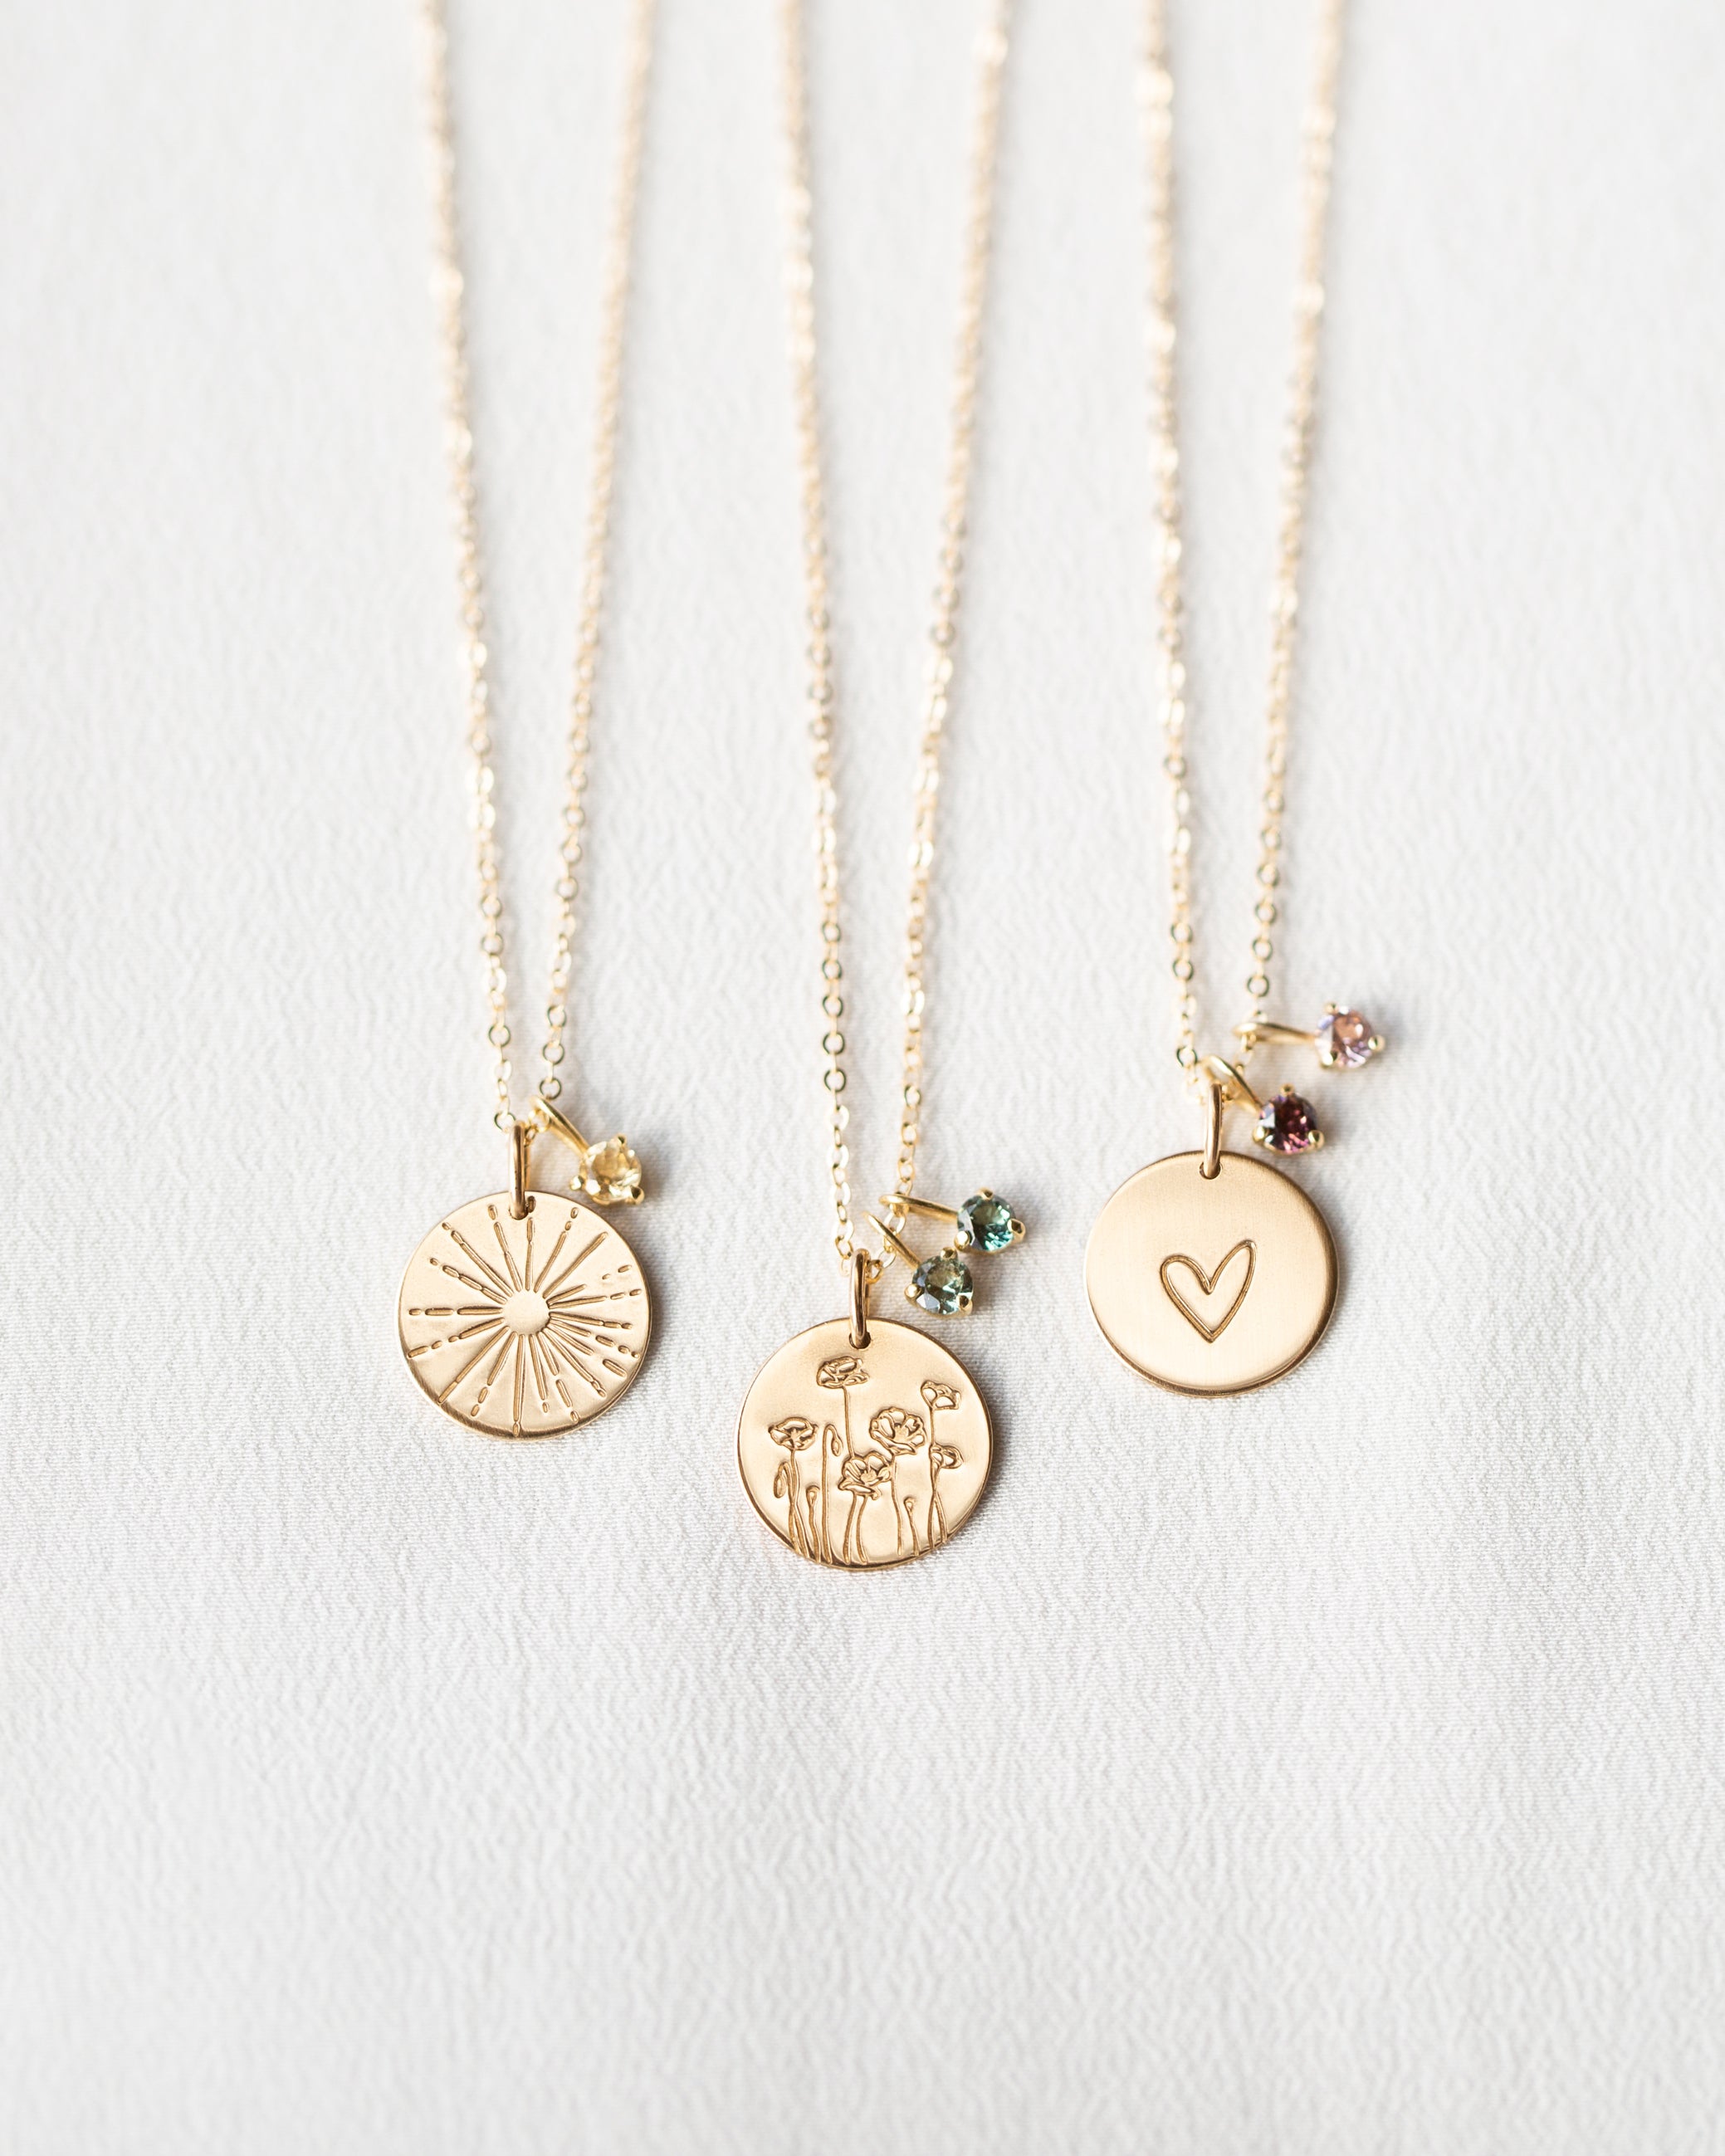 Family Birthstone Charm Necklace By Posh Totty Designs |  notonthehighstreet.com